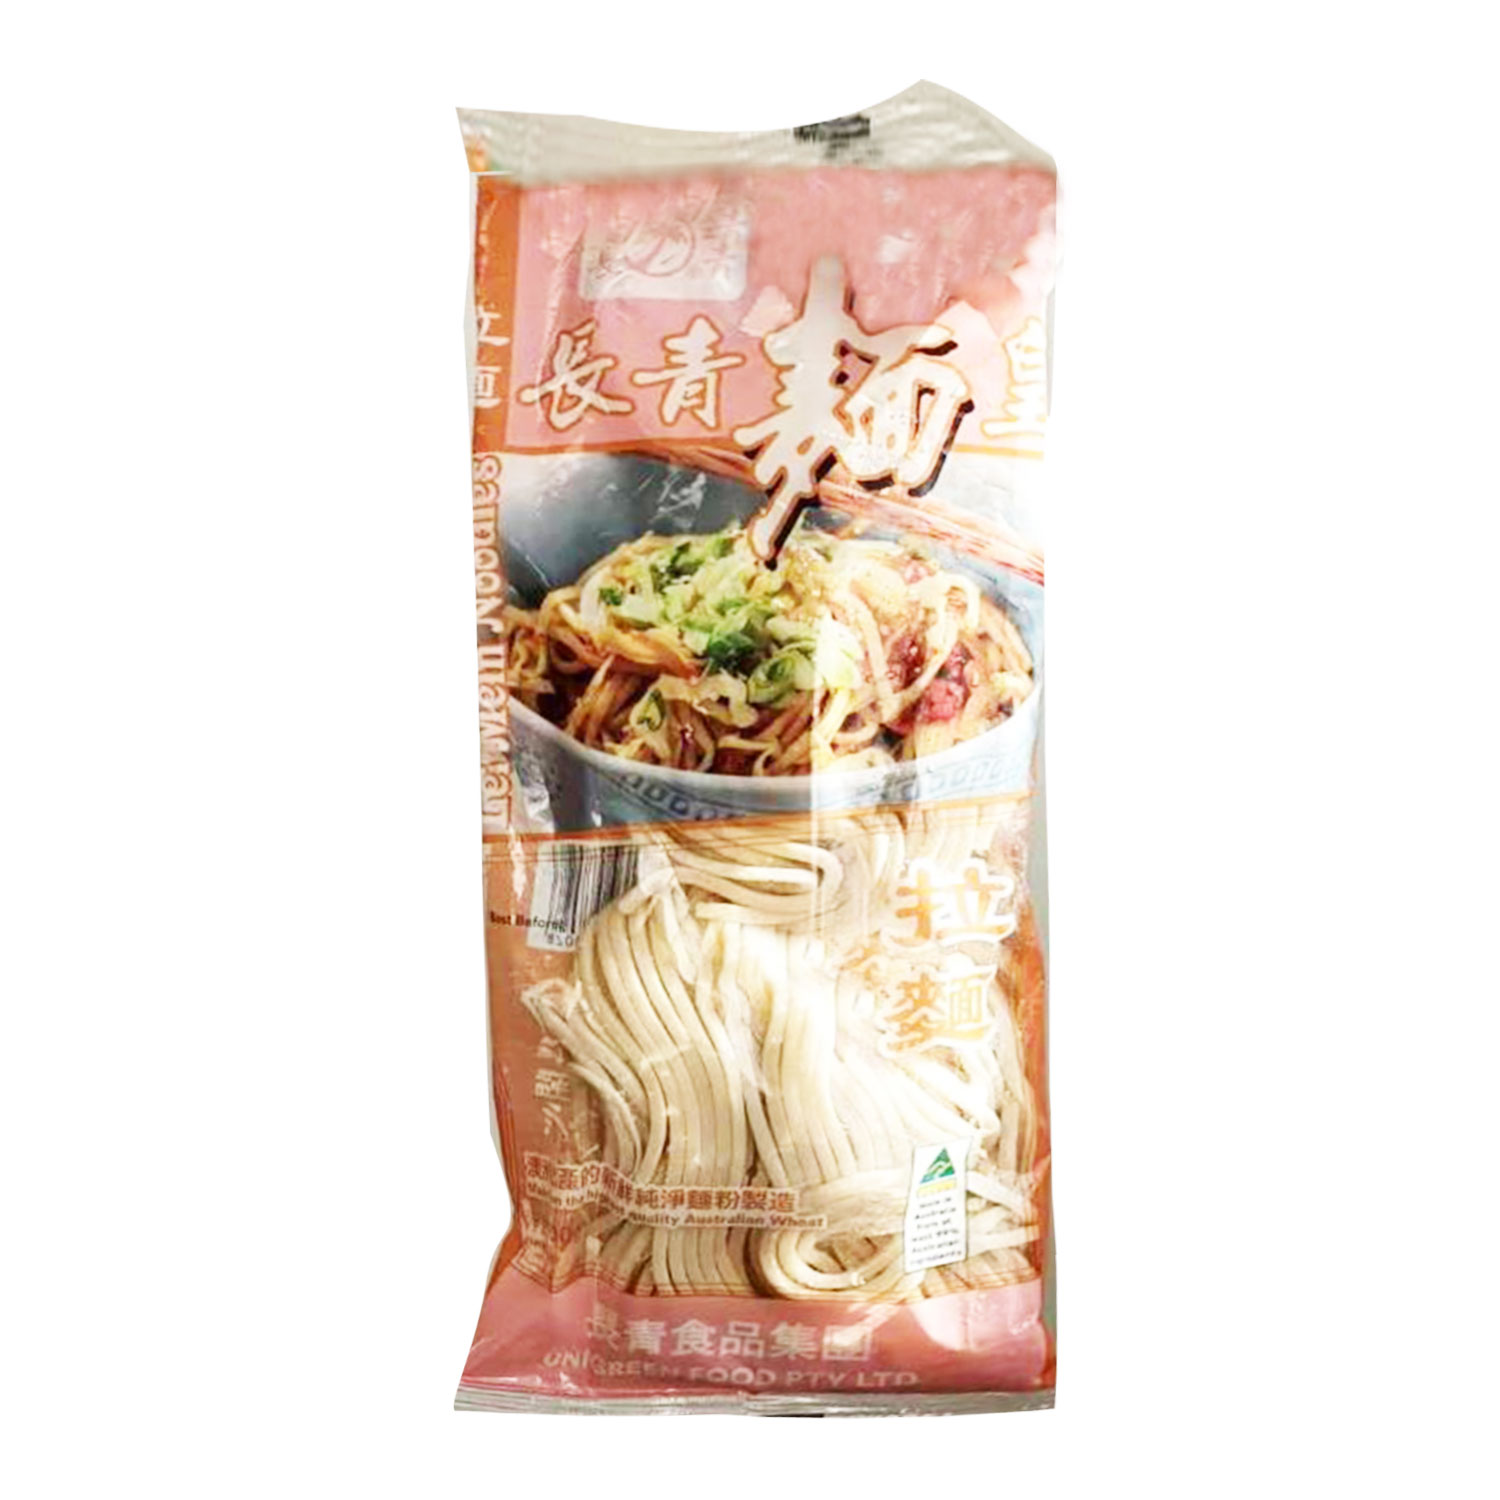 Evergreen Lei Mein Noodle 500g-eBest-Noodles,Pantry